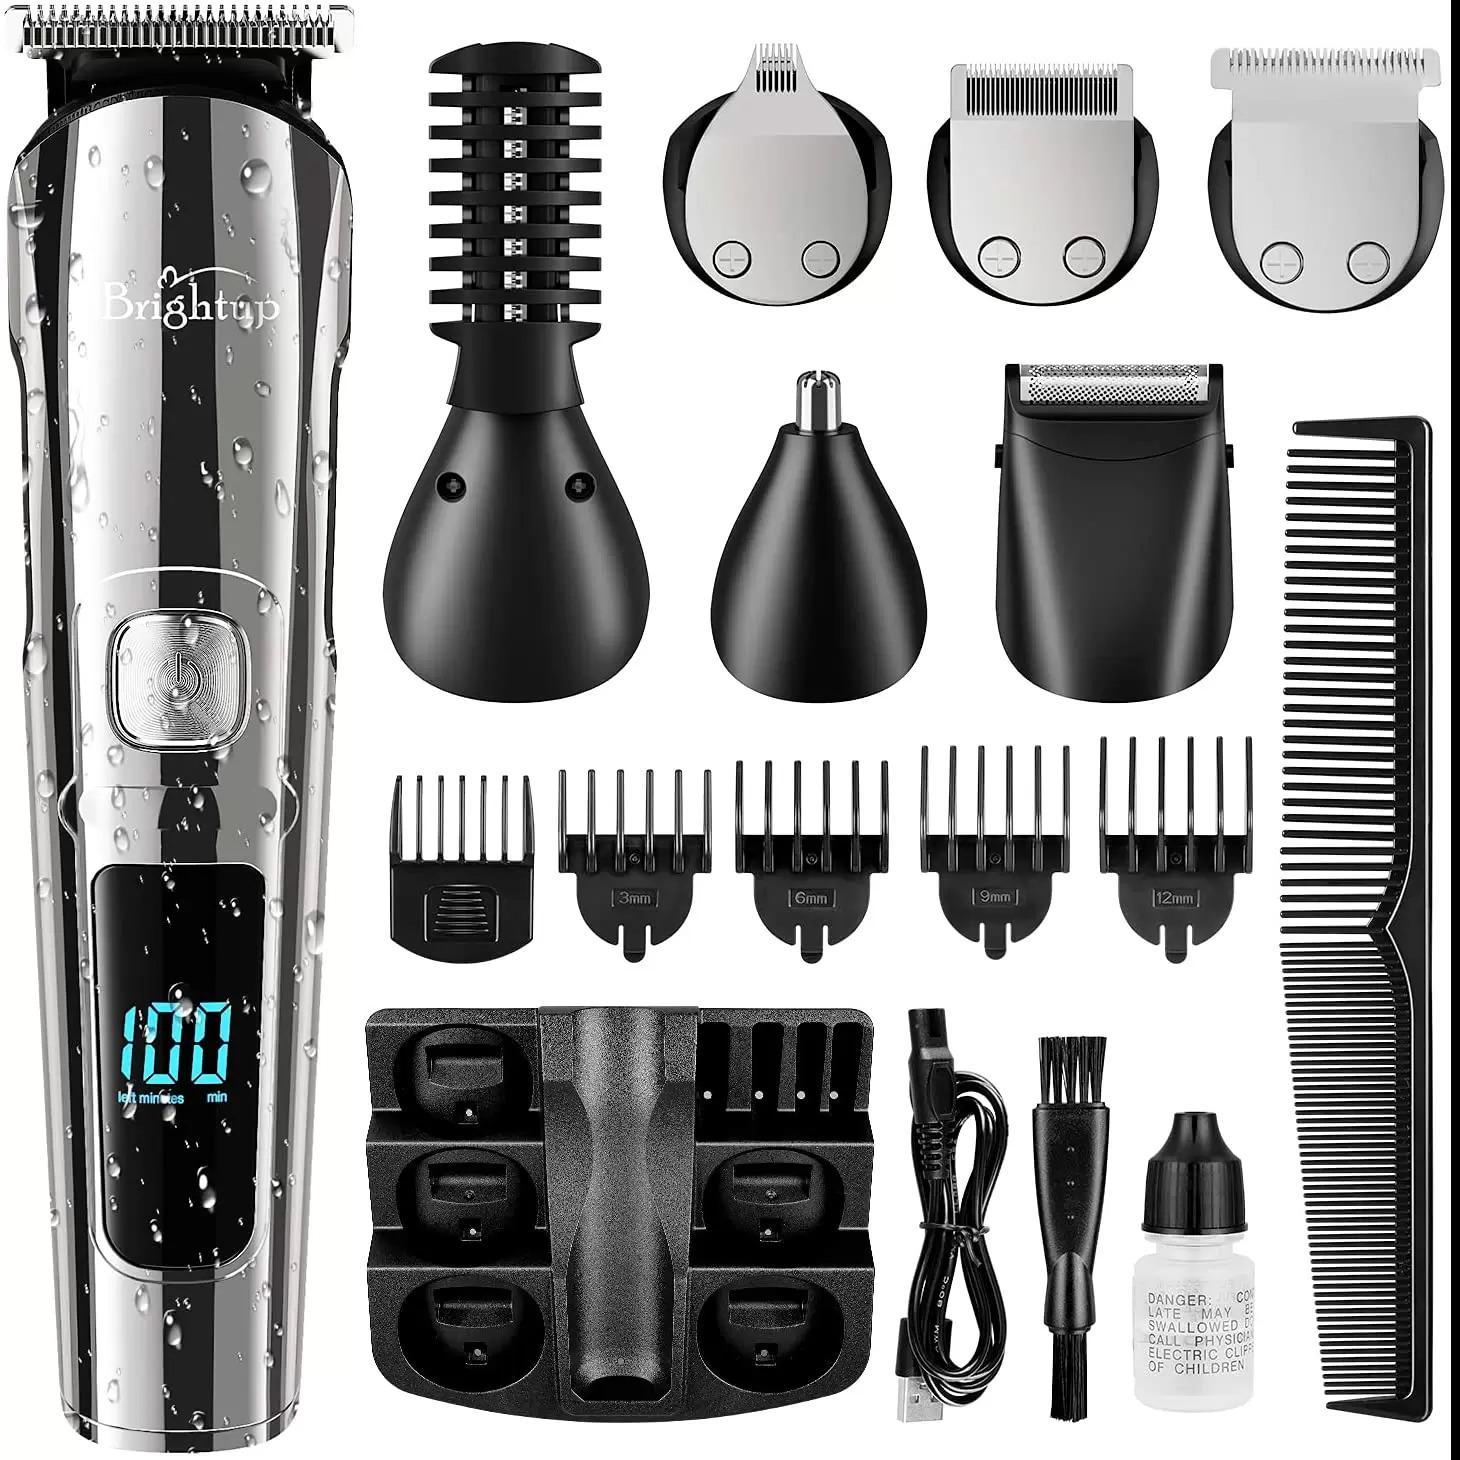 Cordless Hair Clippers Hair Trimmer for Men for $29.82 Shipped